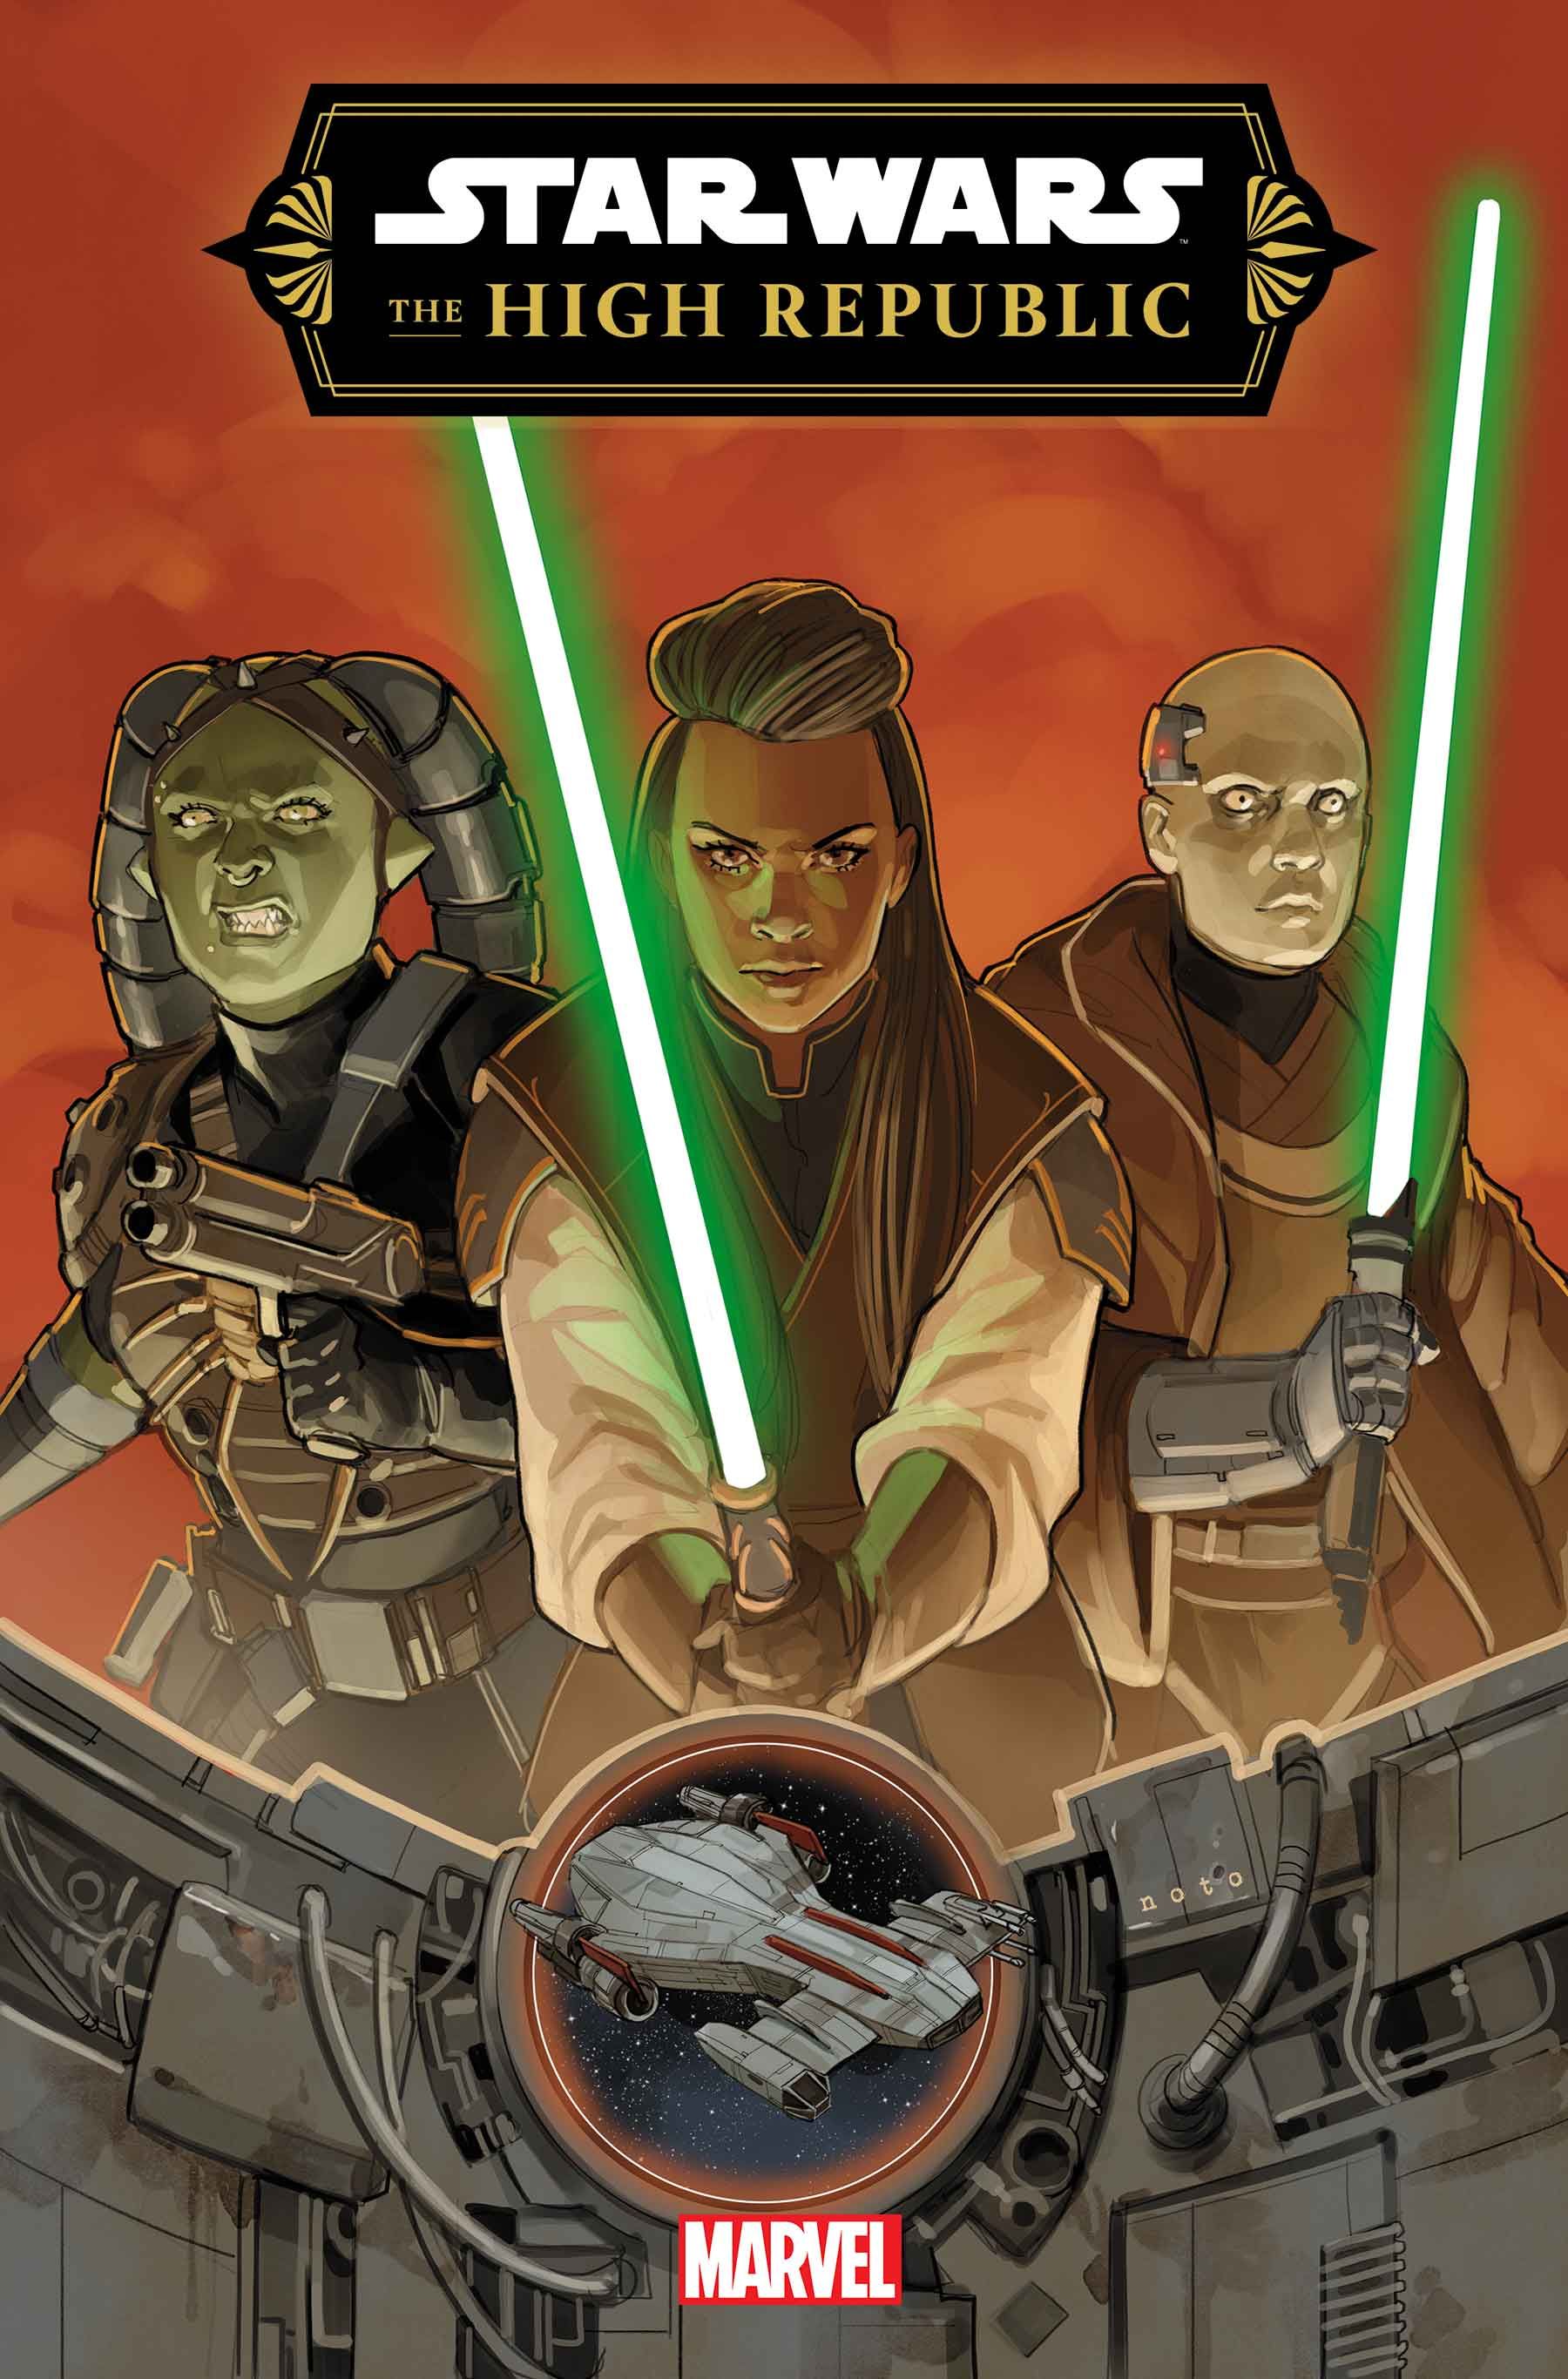 Lourna Dee with her blaster and Keeve Trennis and Terec with their lightsabers raised on Phil Noto's cover of Star Wars The High Republic 2023 1